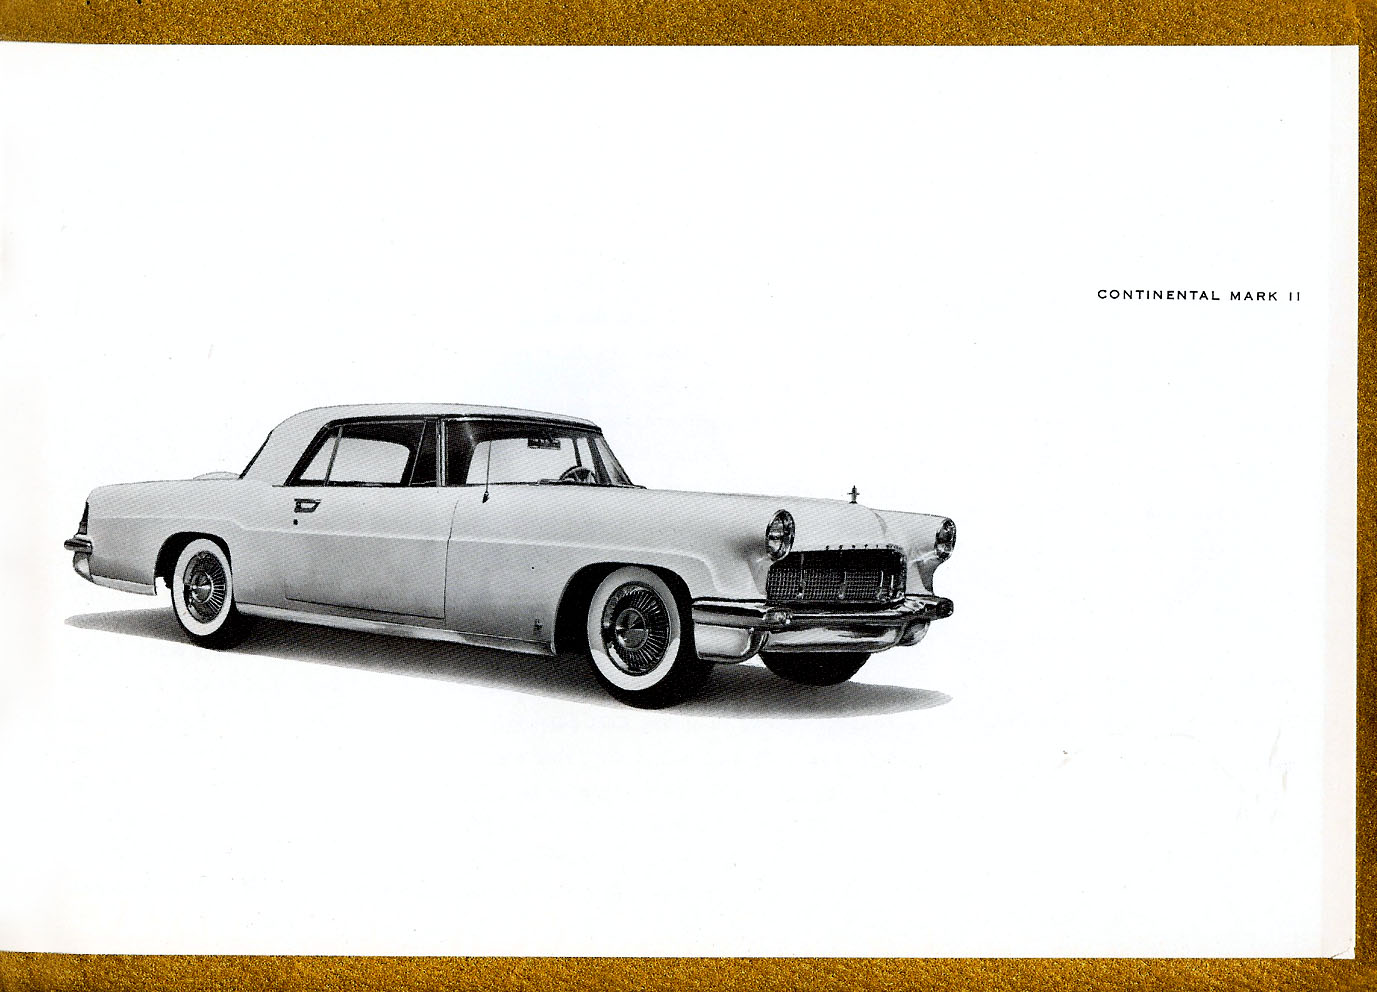 n_1956 Lincoln - The Continentals-17.jpg